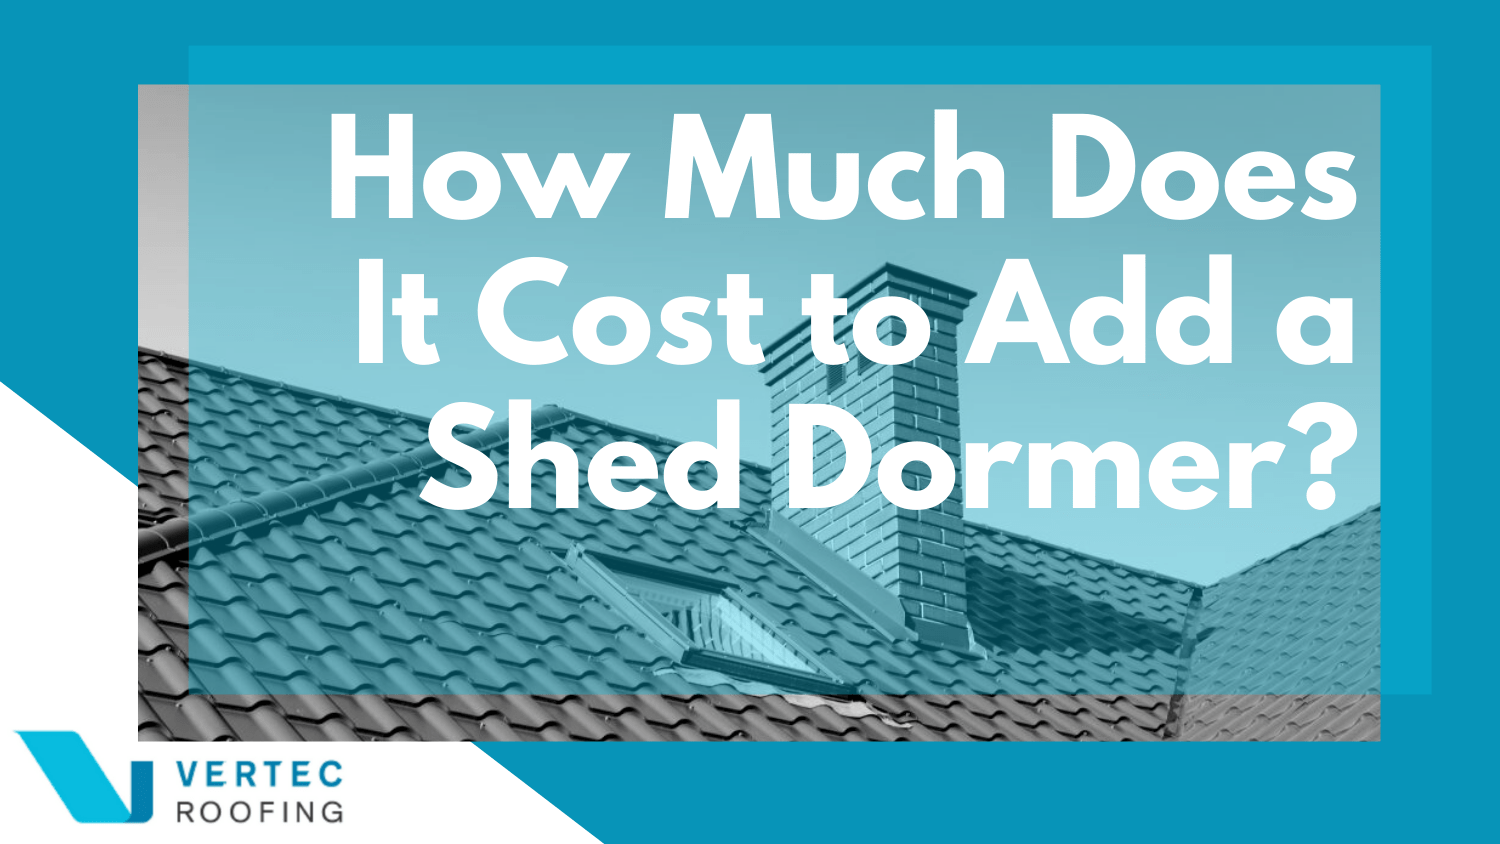 How much does it cost to add a shed dormer cover